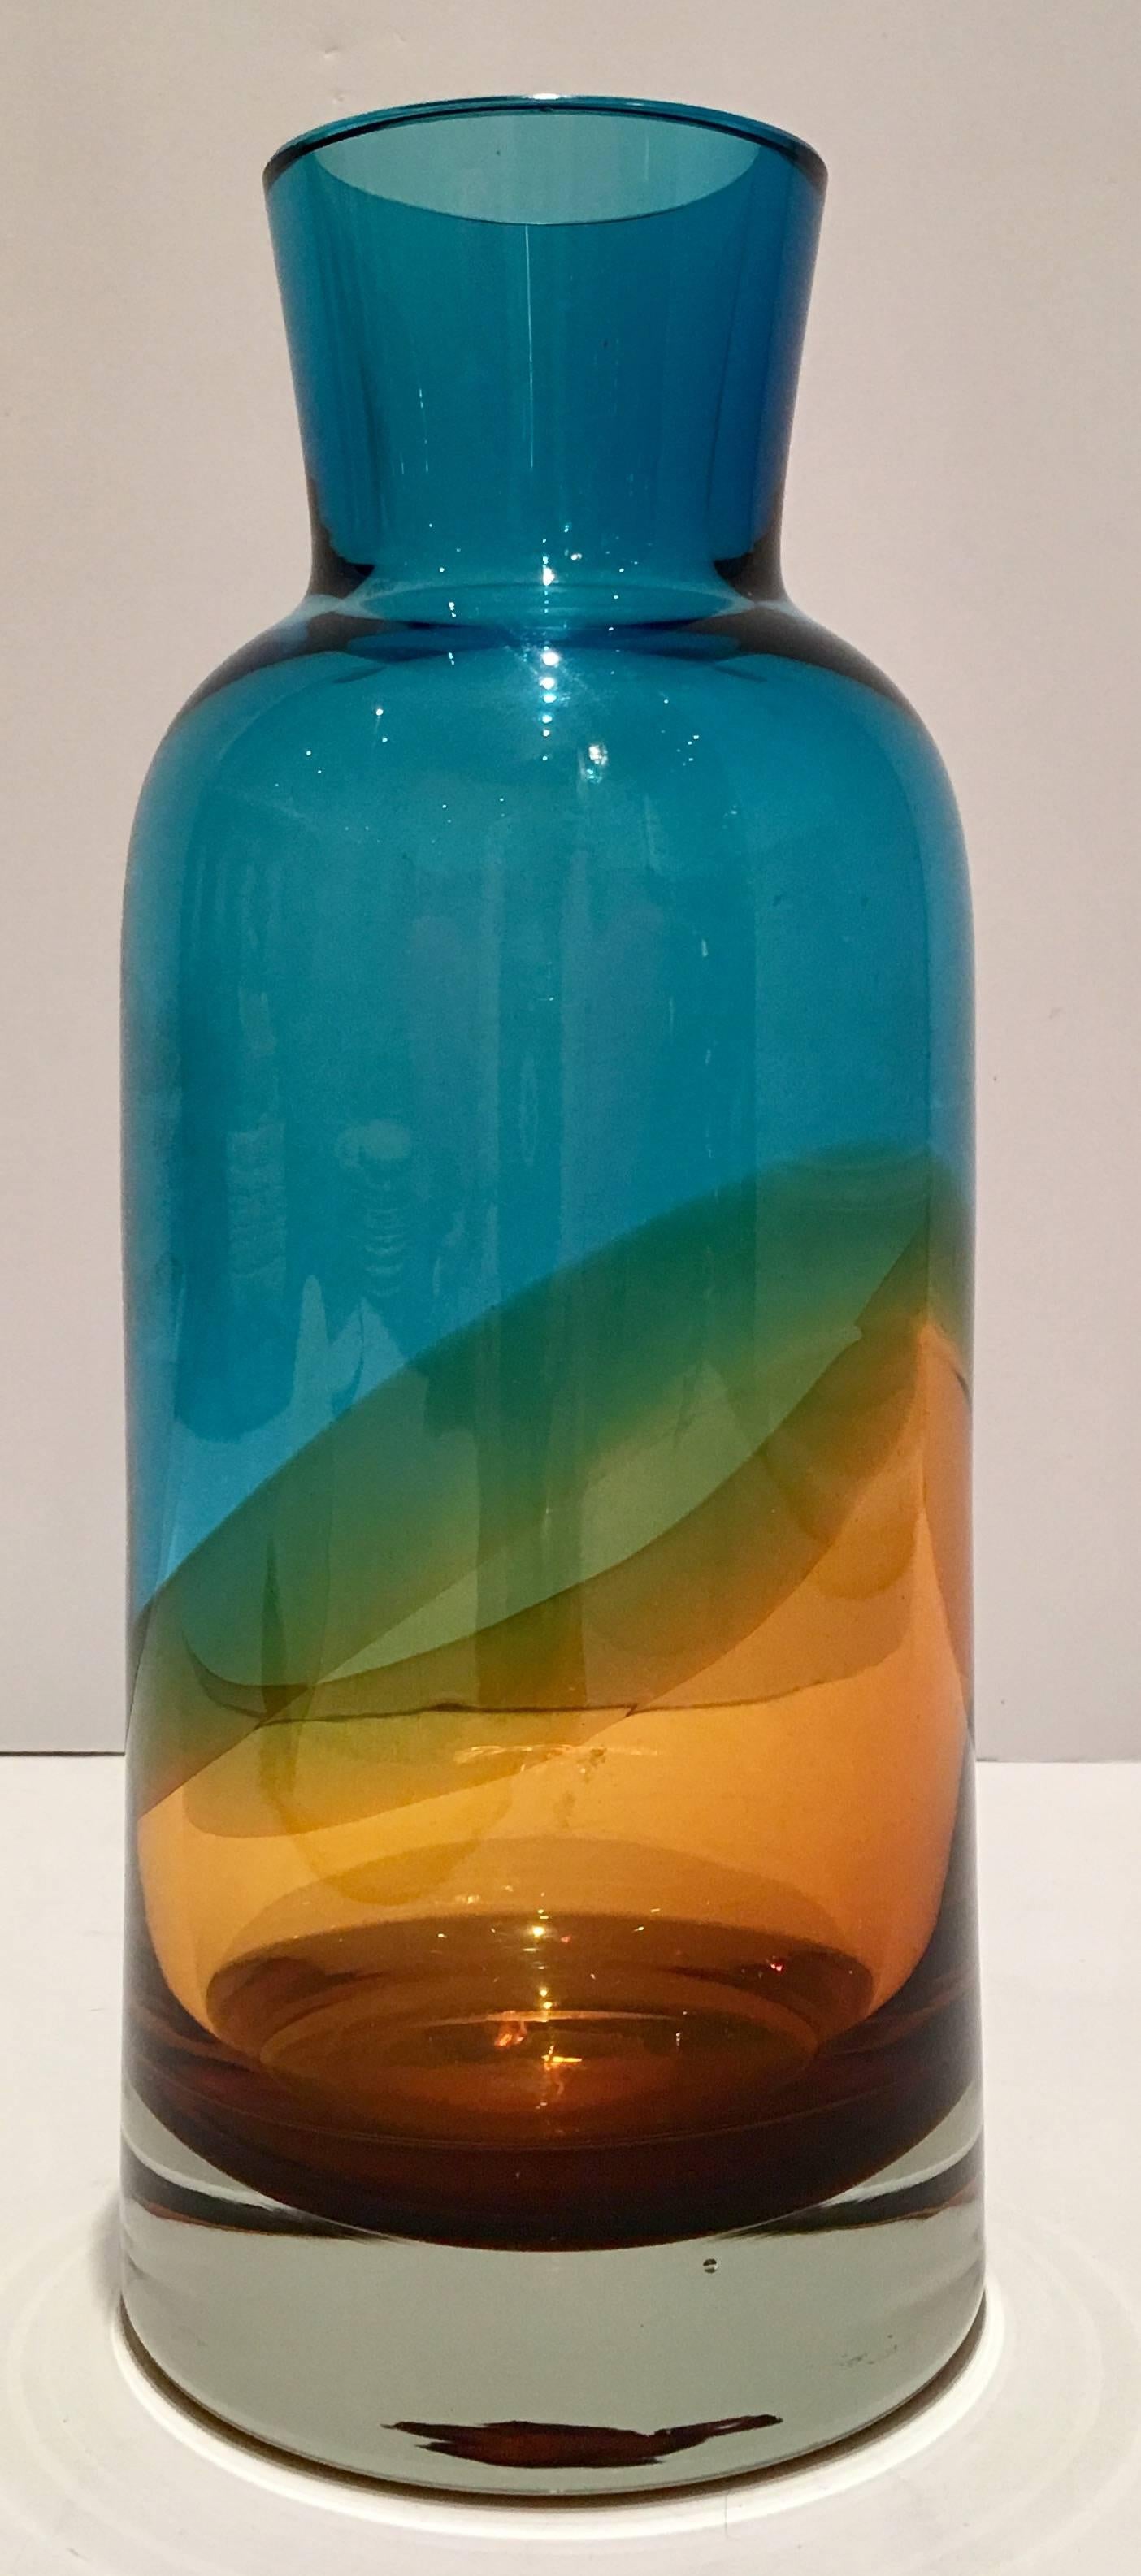 21st century Waterford Evolution collection turquoise and amber swirl bottle neck style vase. This vibrant vase is signed on the underside, Revolution Waterford. Top opening measures, 2.75" inches.